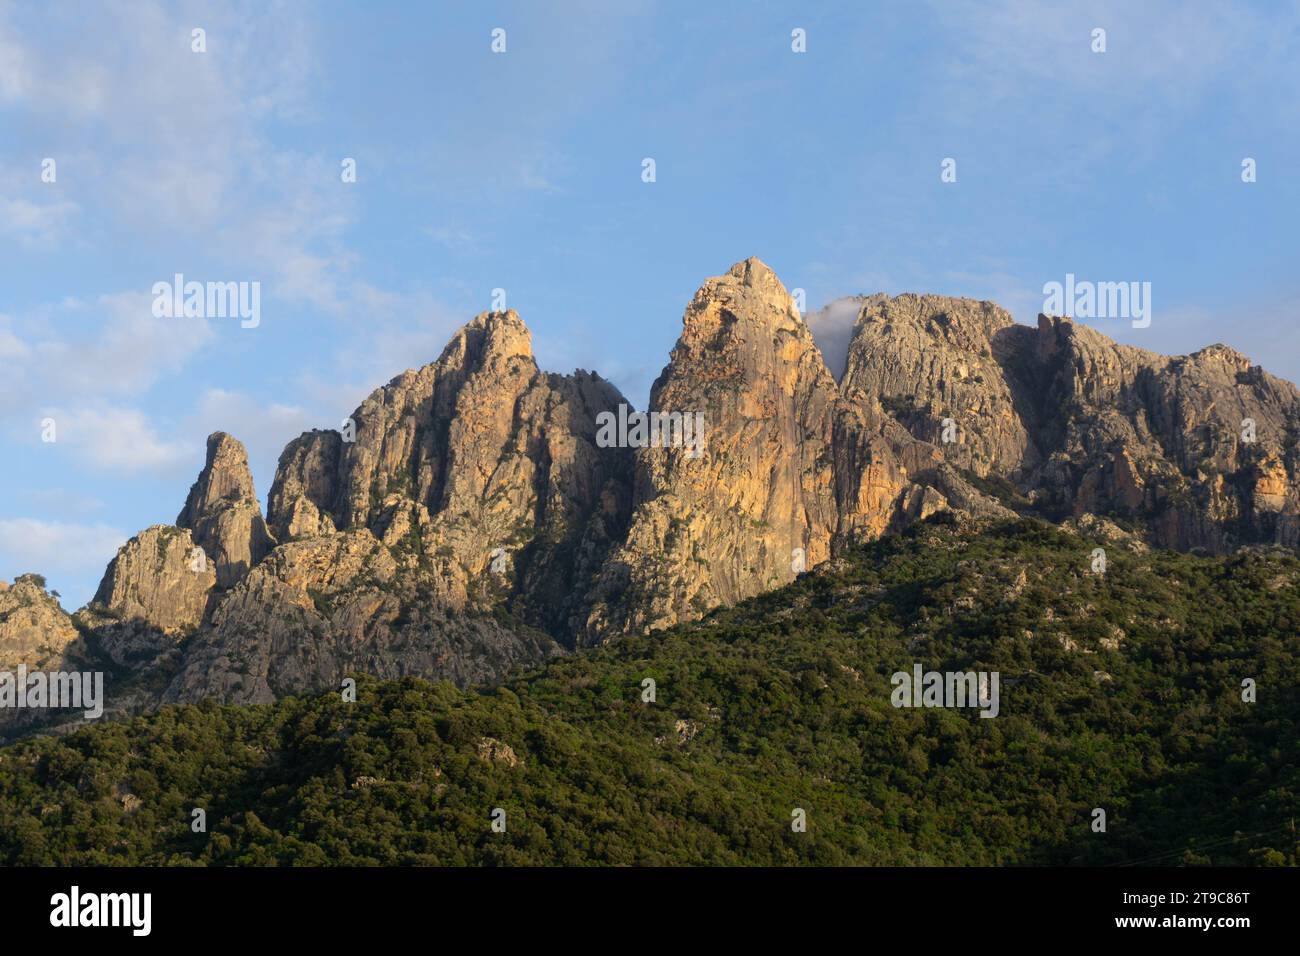 Golden hour on Corsica unveils rocky orange peaks adorned with lush greenery against a backdrop of a serene blue sky. Corsica, mountains, France. Stock Photo